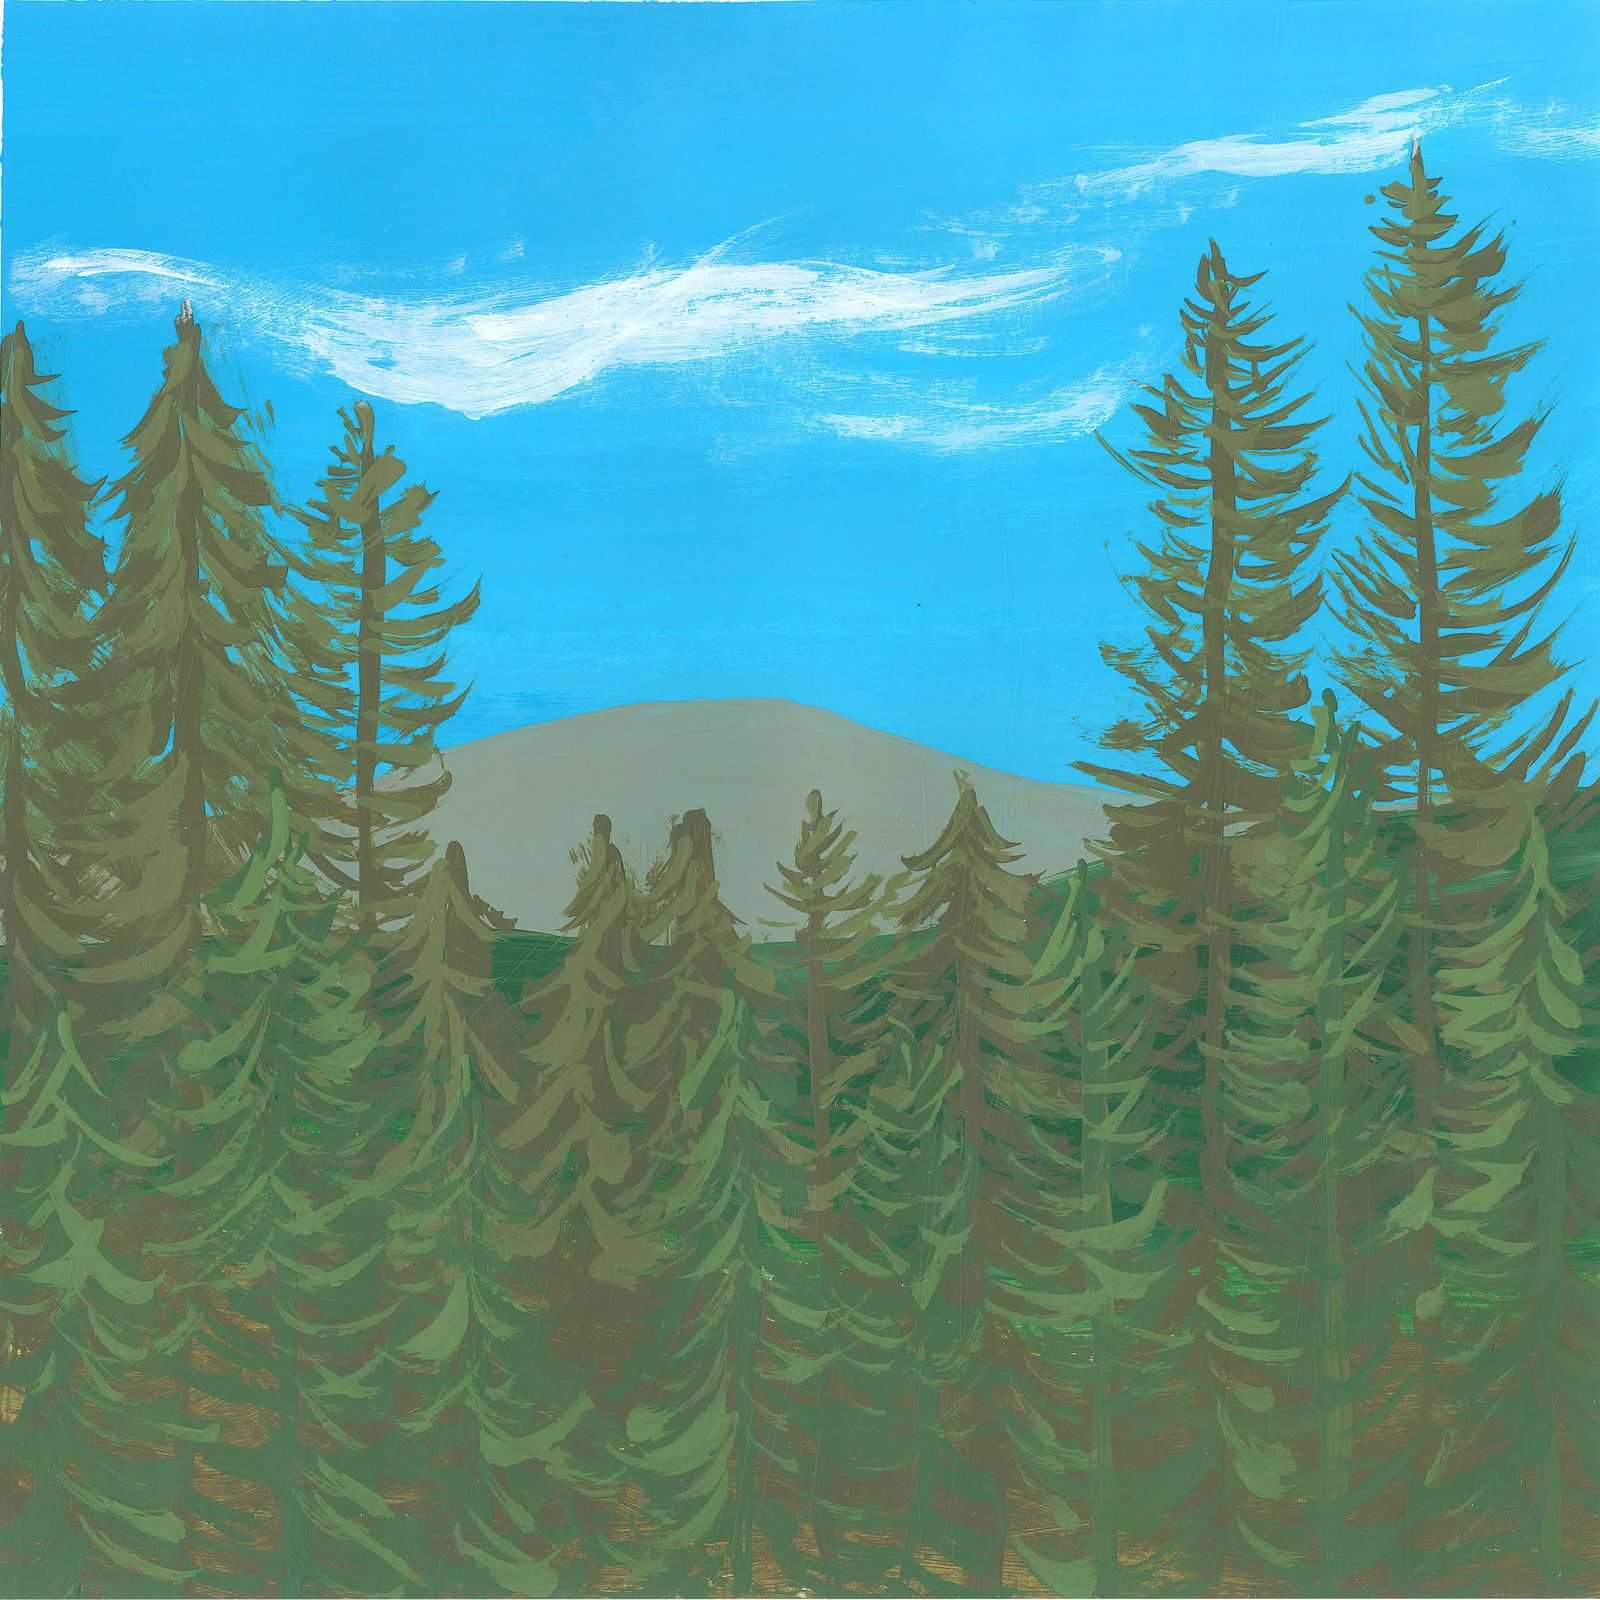 The sound of a primal forest in Transylvania - nature landscape painting - earth.fm